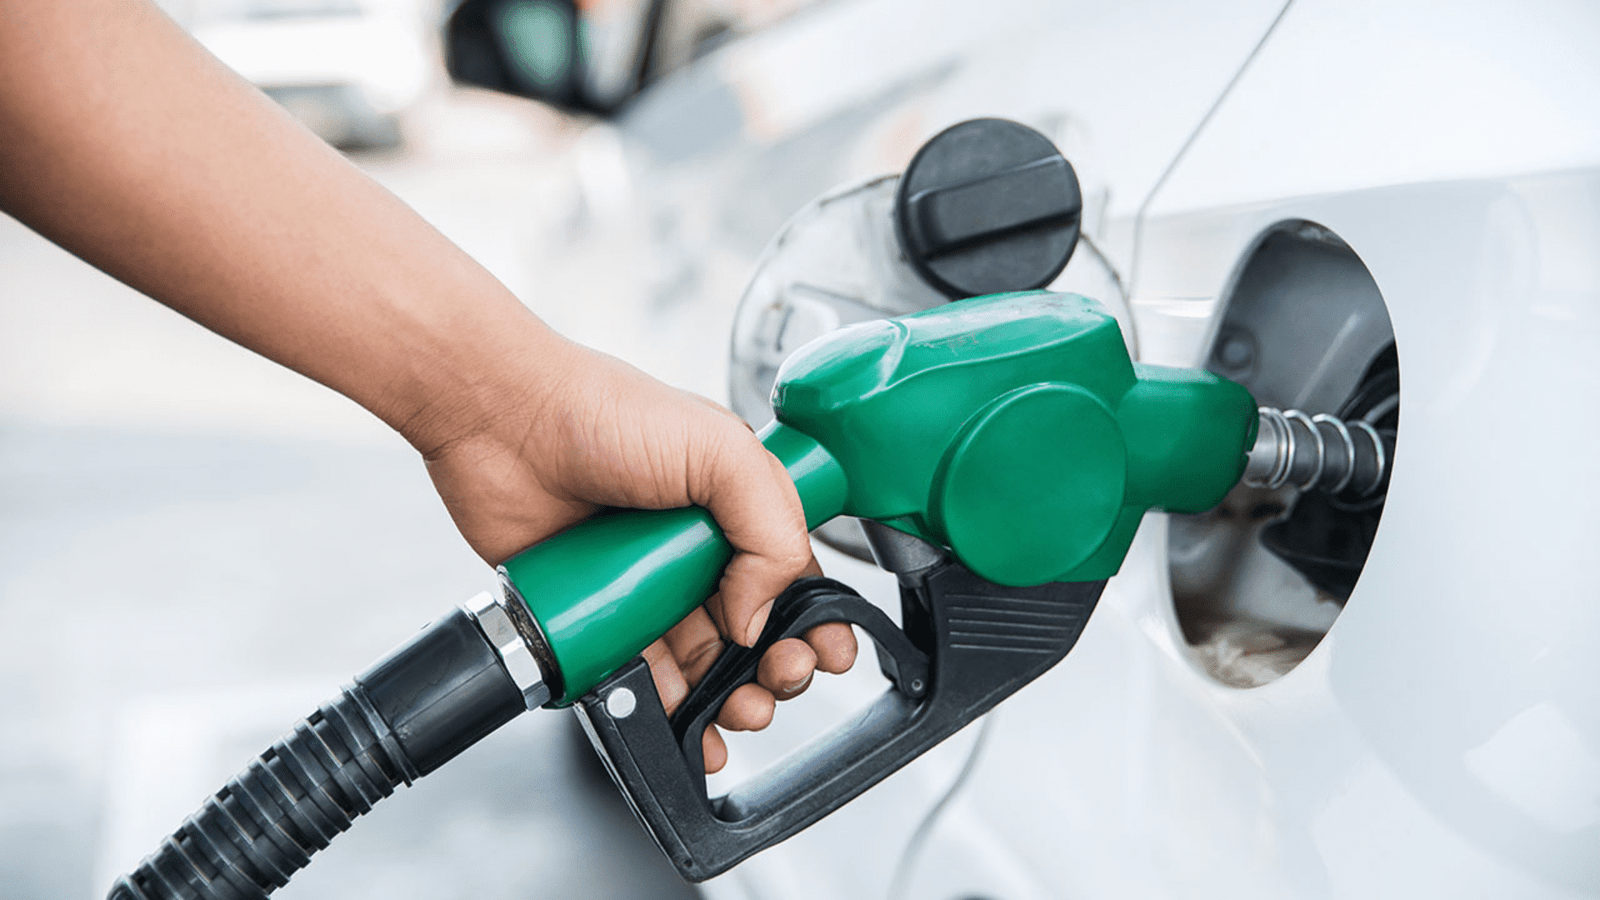 Petrol, diesel prices likely to fall next month due to global oil price dip